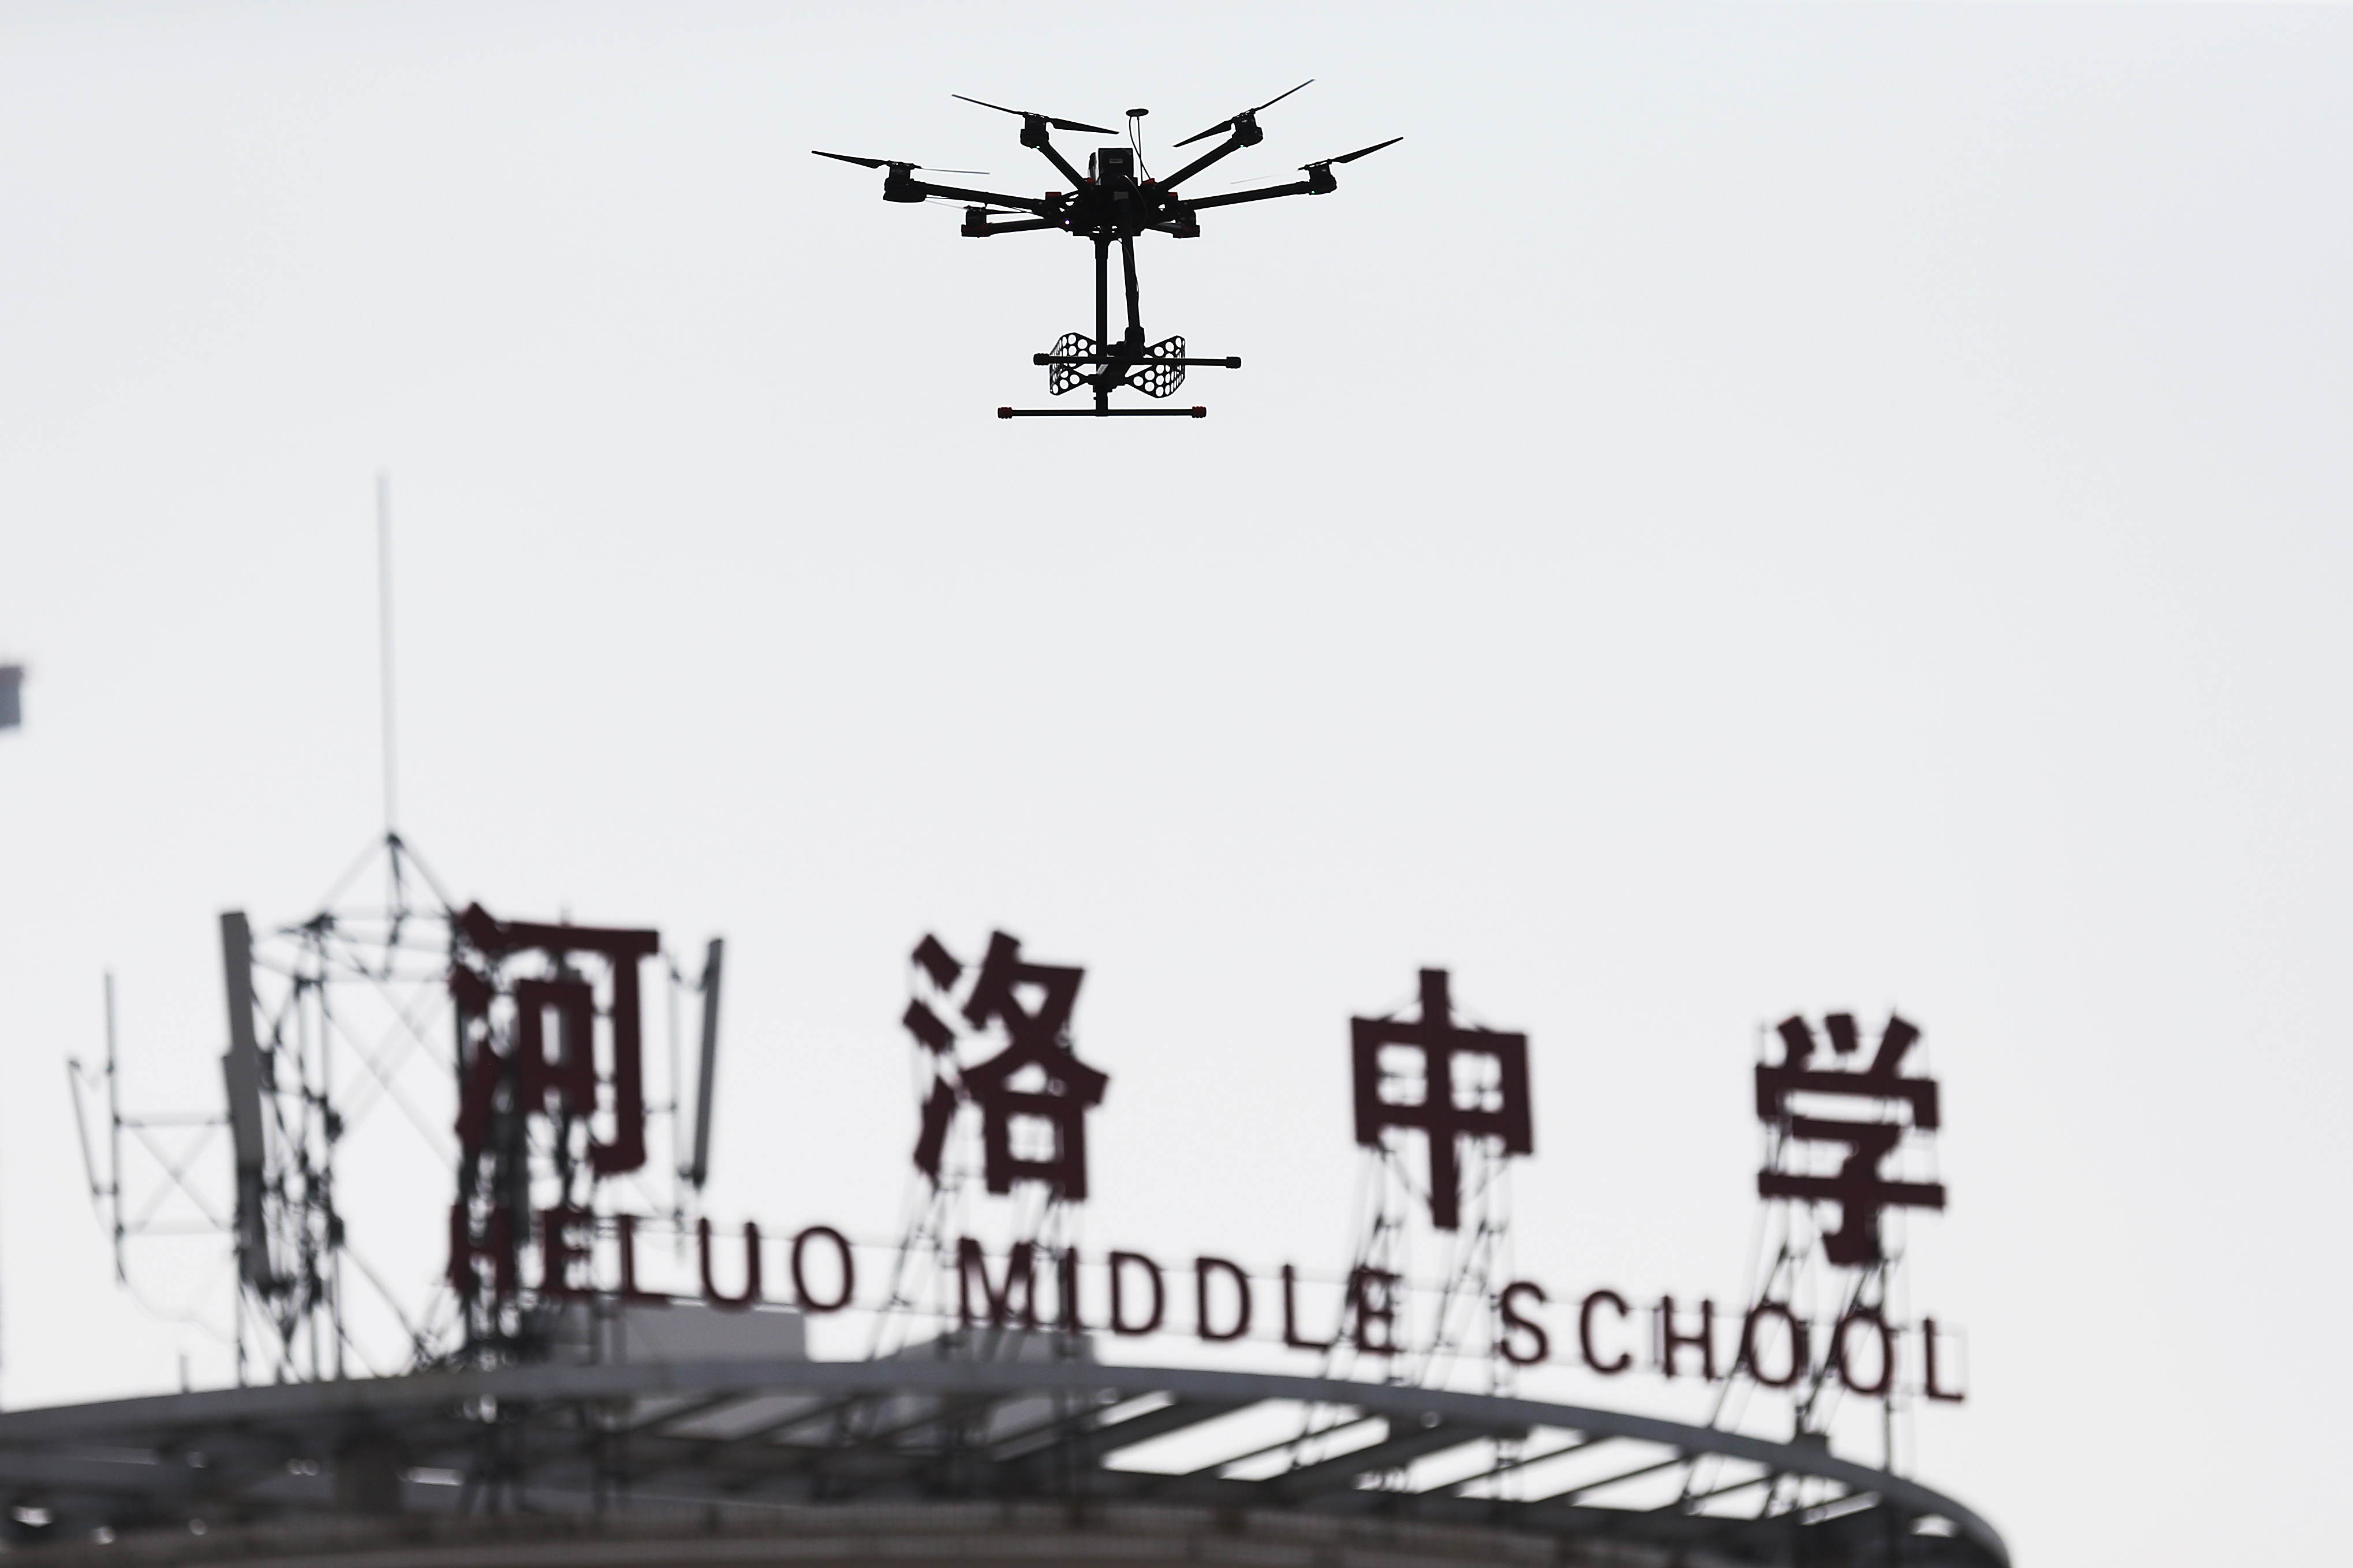 An unmanned aerial vehicle (UAV), or drone, used to detect radio signals to prevent student from cheating, hovers over an exam site during the first examination of the 2015 National College Entrance Exam, also known as Gaokao, at Heluo Middle School in Luoyang city, central China's Henan province, 7 June 2015. (Dong Lifei/Imaginechina)